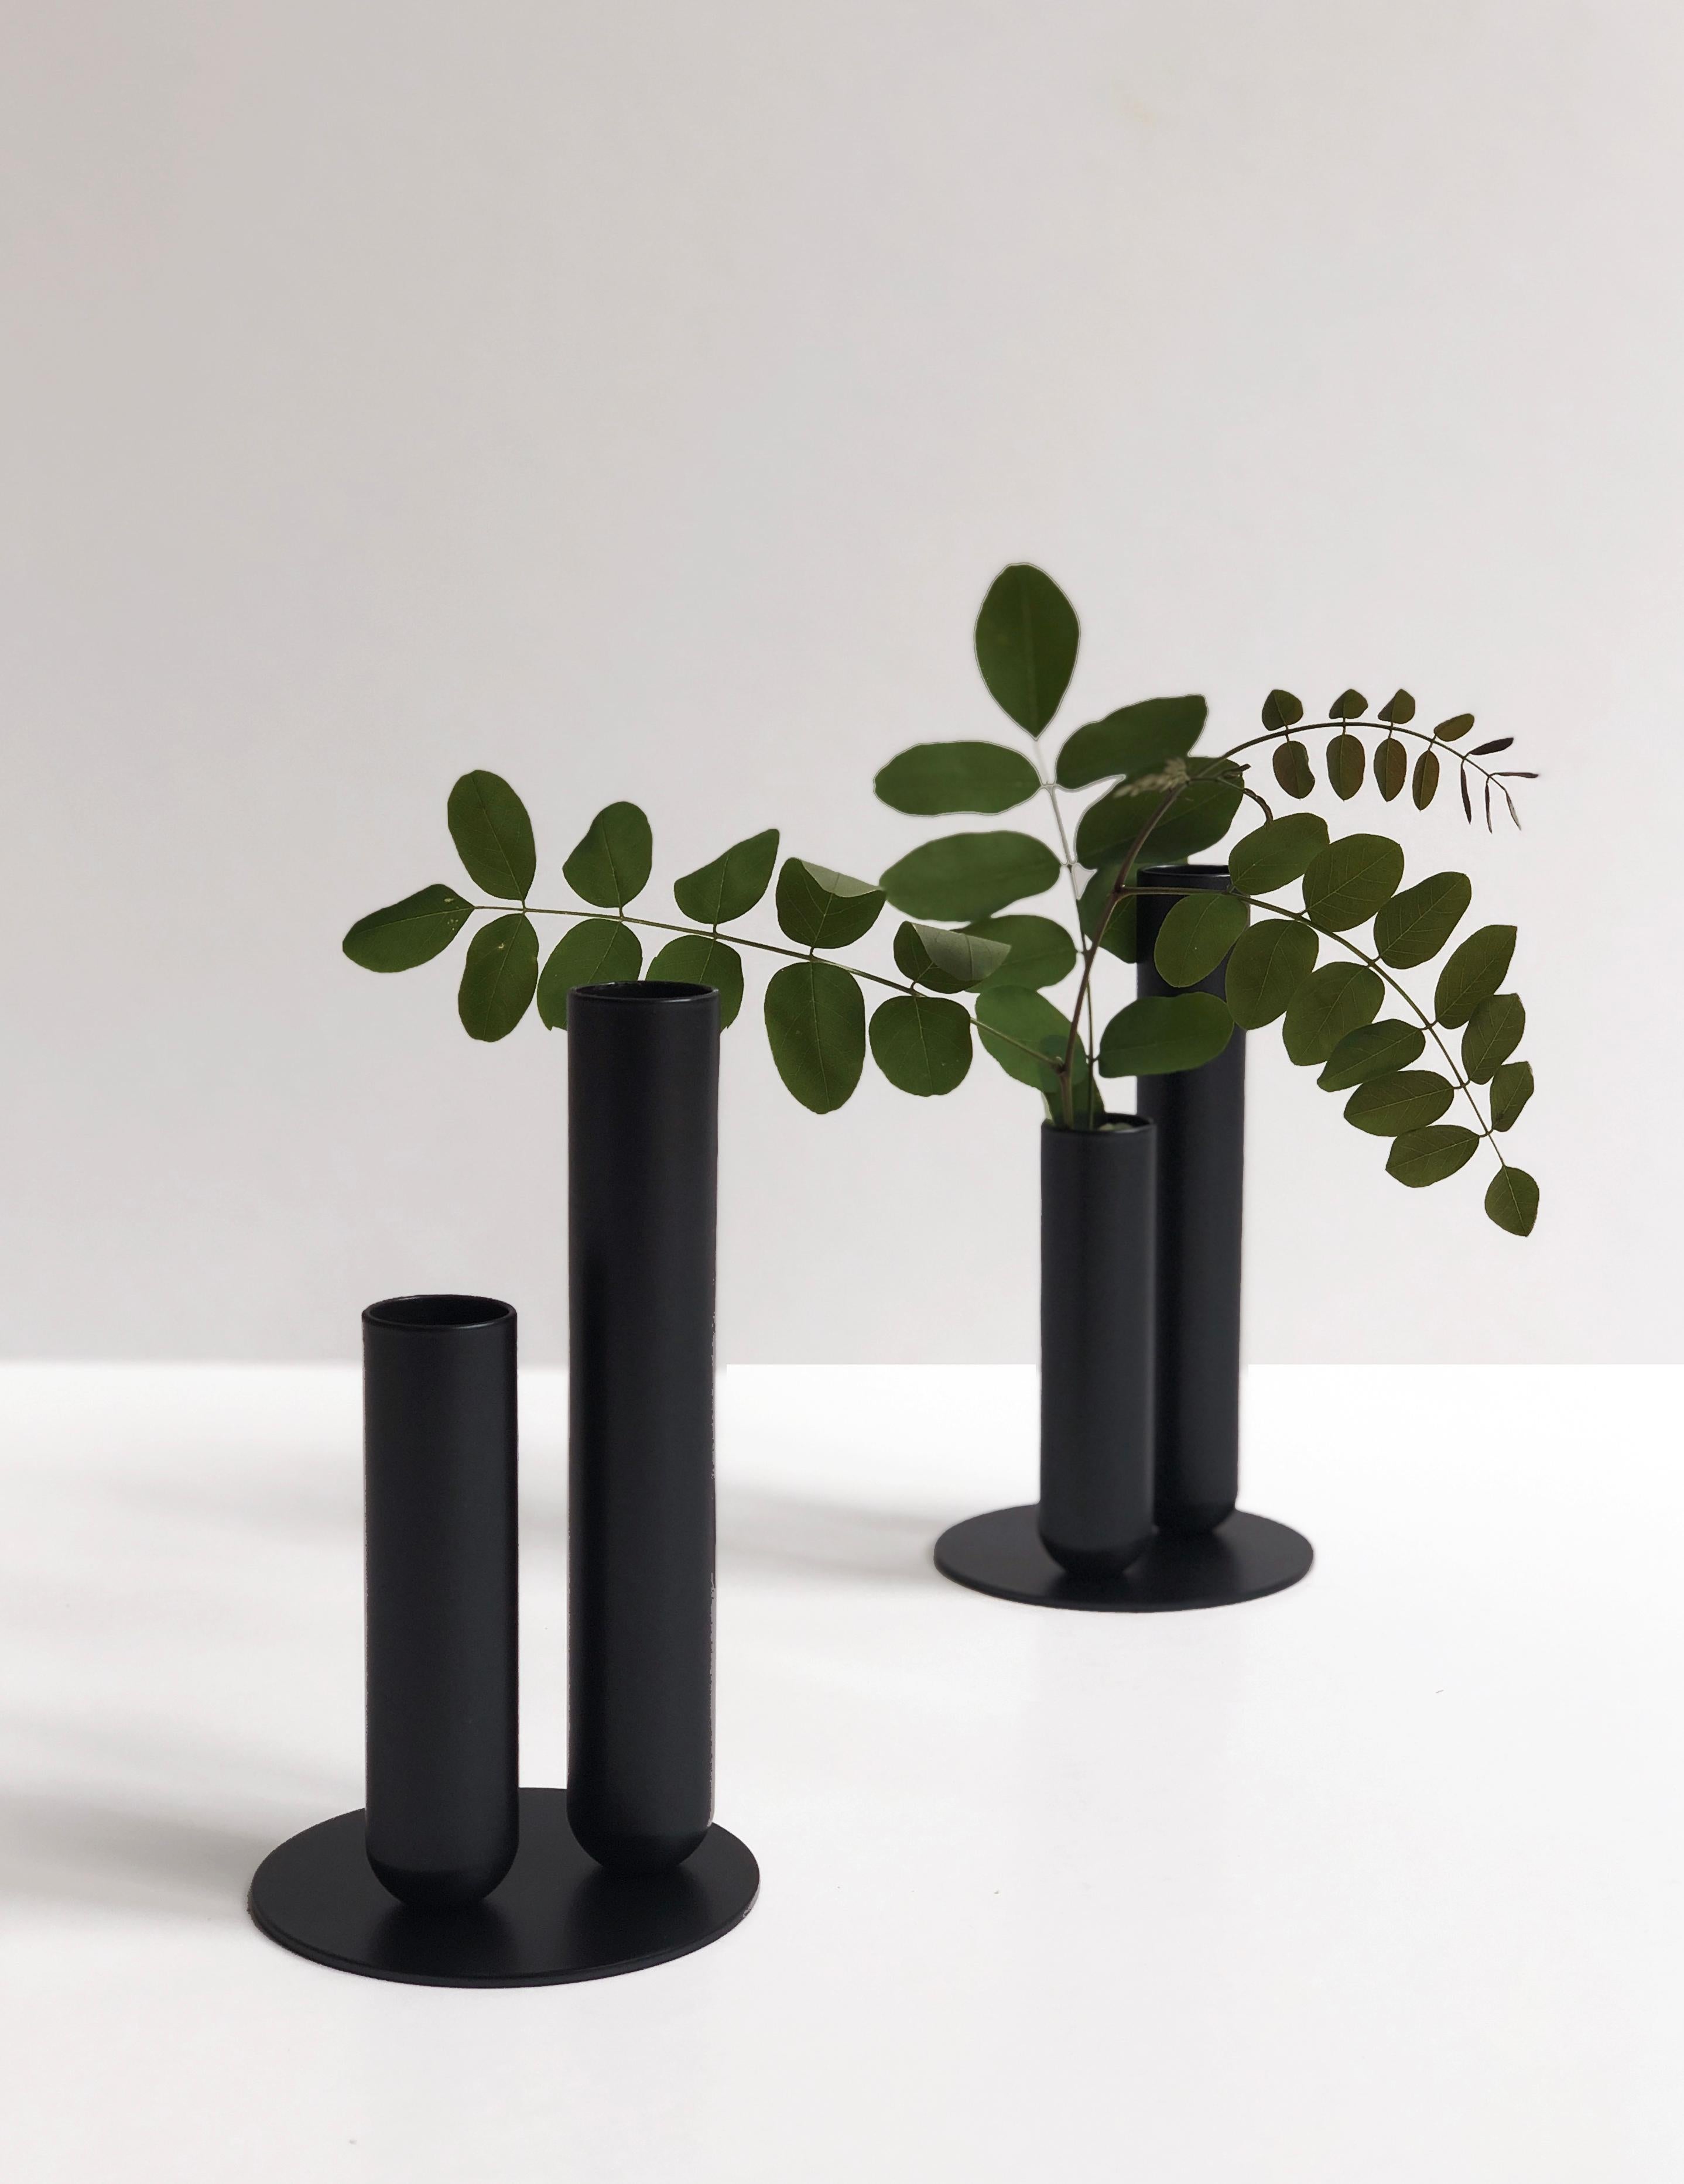 Set of 2 Soliflore Black Vases by Mademoiselle Jo
Dimensions: Ø 8.5 x H 15 cm (each).
Materials: Turned metal with magnet and EVA foam tray.

Hollow cylinders of 15 cm and 10 cm, diameter 2.5 cm. Plate diameter of 8.5 cm. Metal version with matt